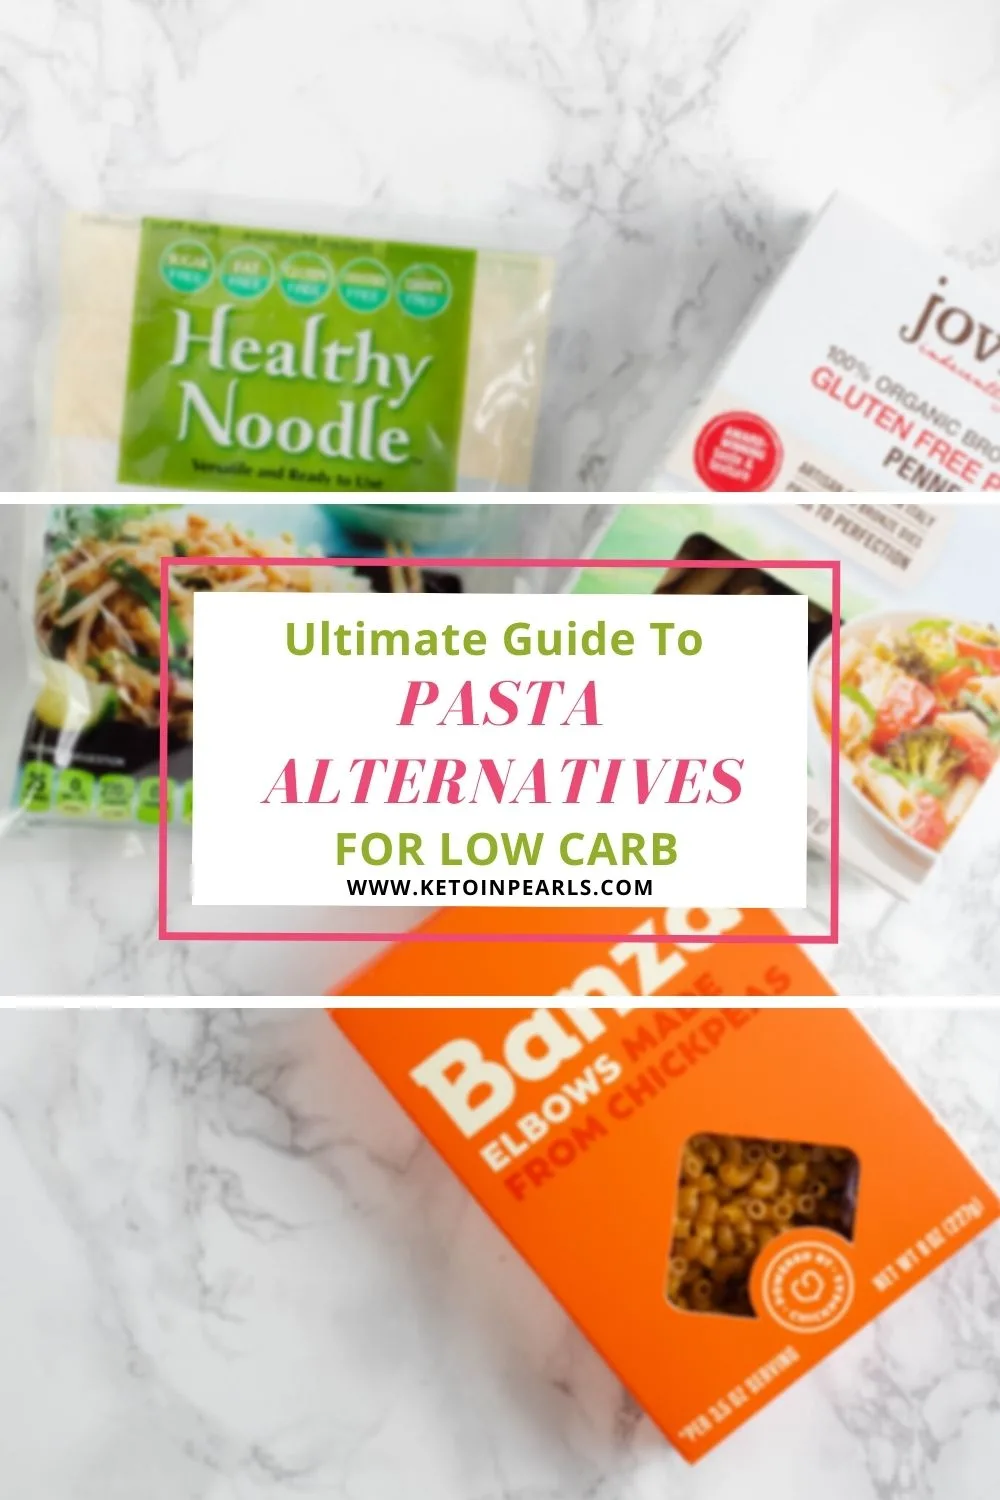 This guide will show you some of the most popular pasta alternatives for low carb noodles, keto noodles, and gluten free noodles as well as highlight 14 recipes using them!